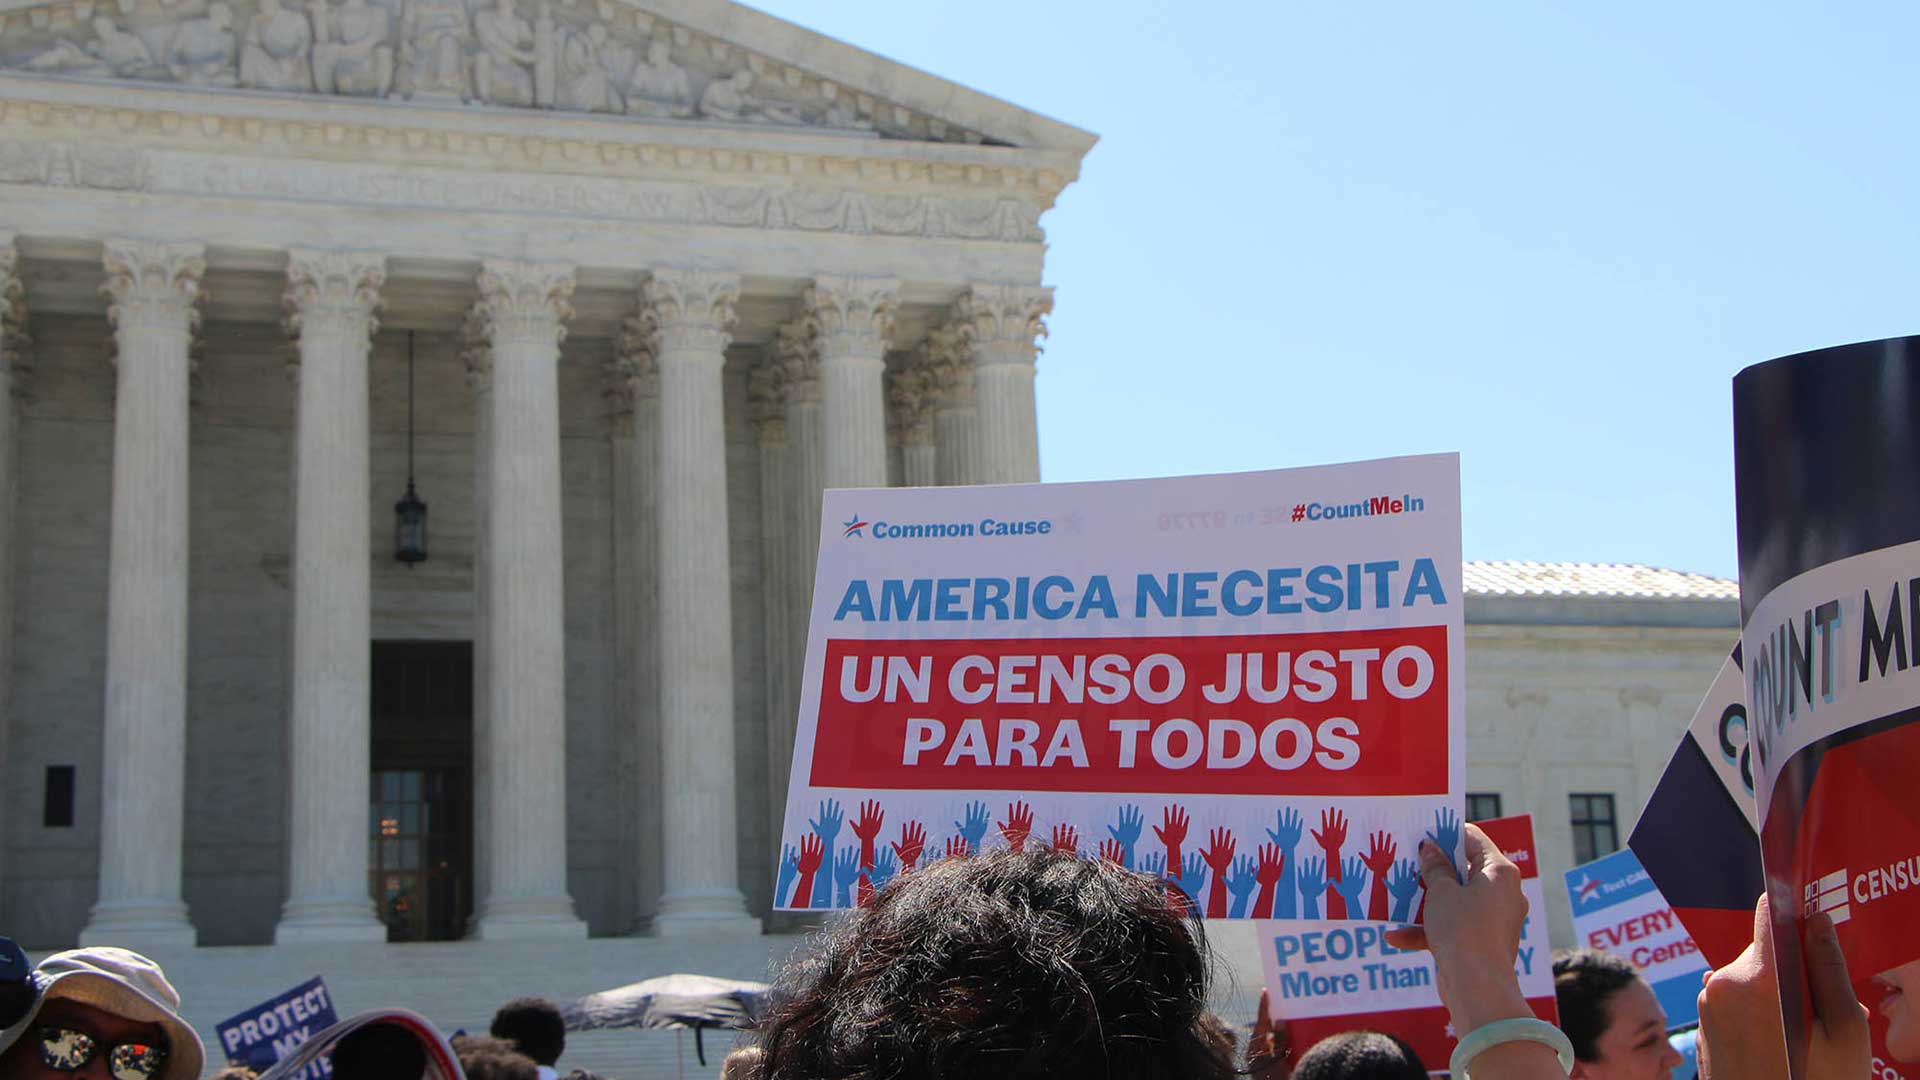 Protesters in 2019 at the Supreme Court, which rejected a Trump administration plan to add a citizenship question to the 2020 census. Now the president is directing the Census Bureau to take “all appropriate action” to determine the number of undocumented immigrants, even without the question.